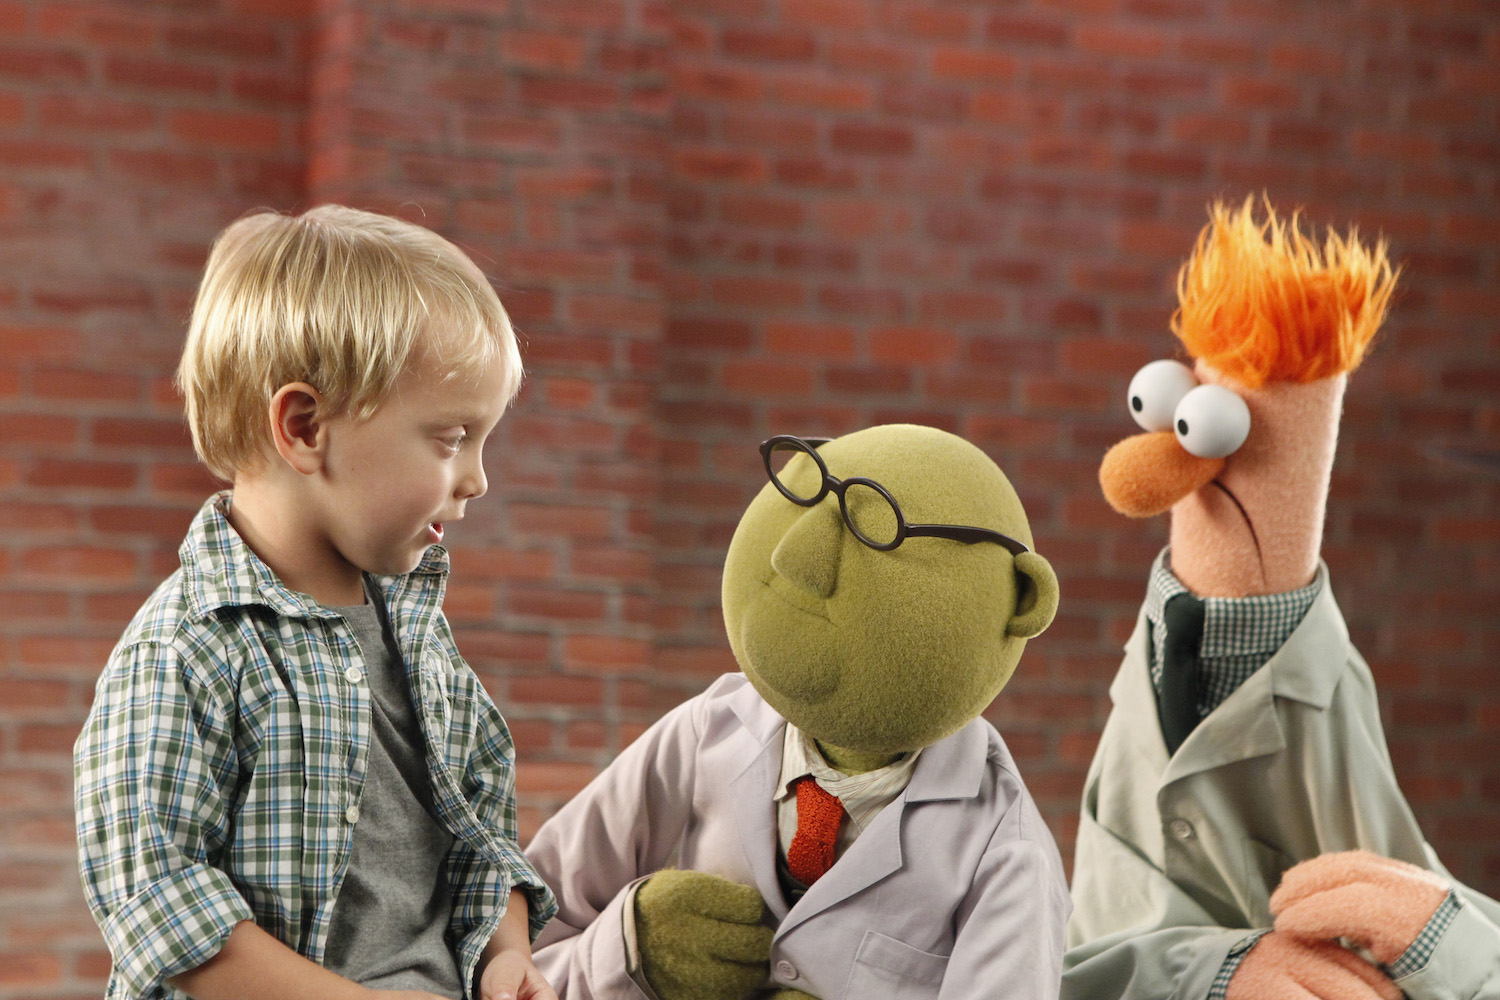 Dr. Bunsen Honeydew and Beaker with a young fan.